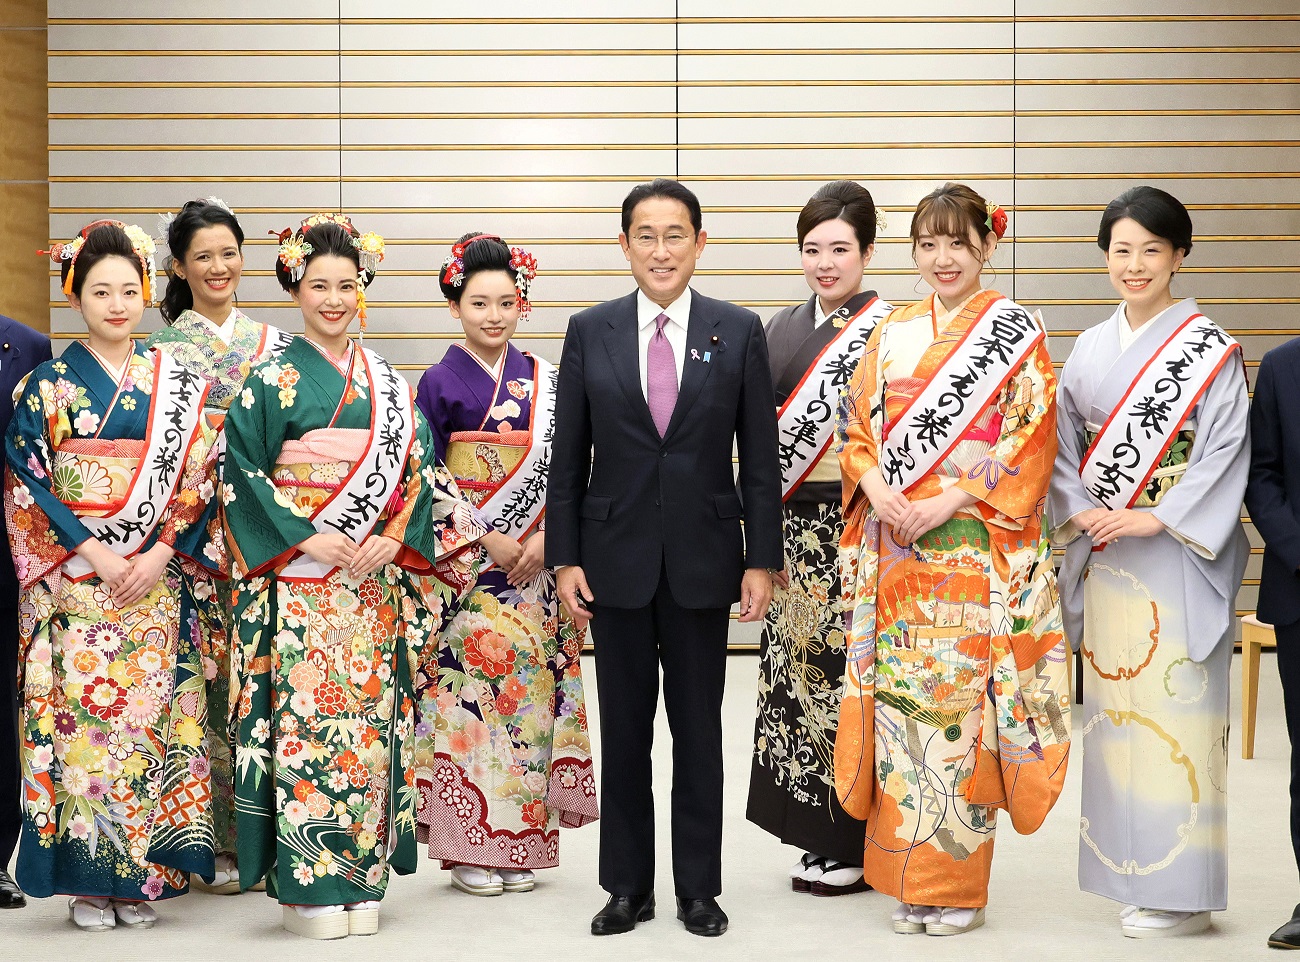 Courtesy Call from Winners of the All Japan Kimono Dressing Contest